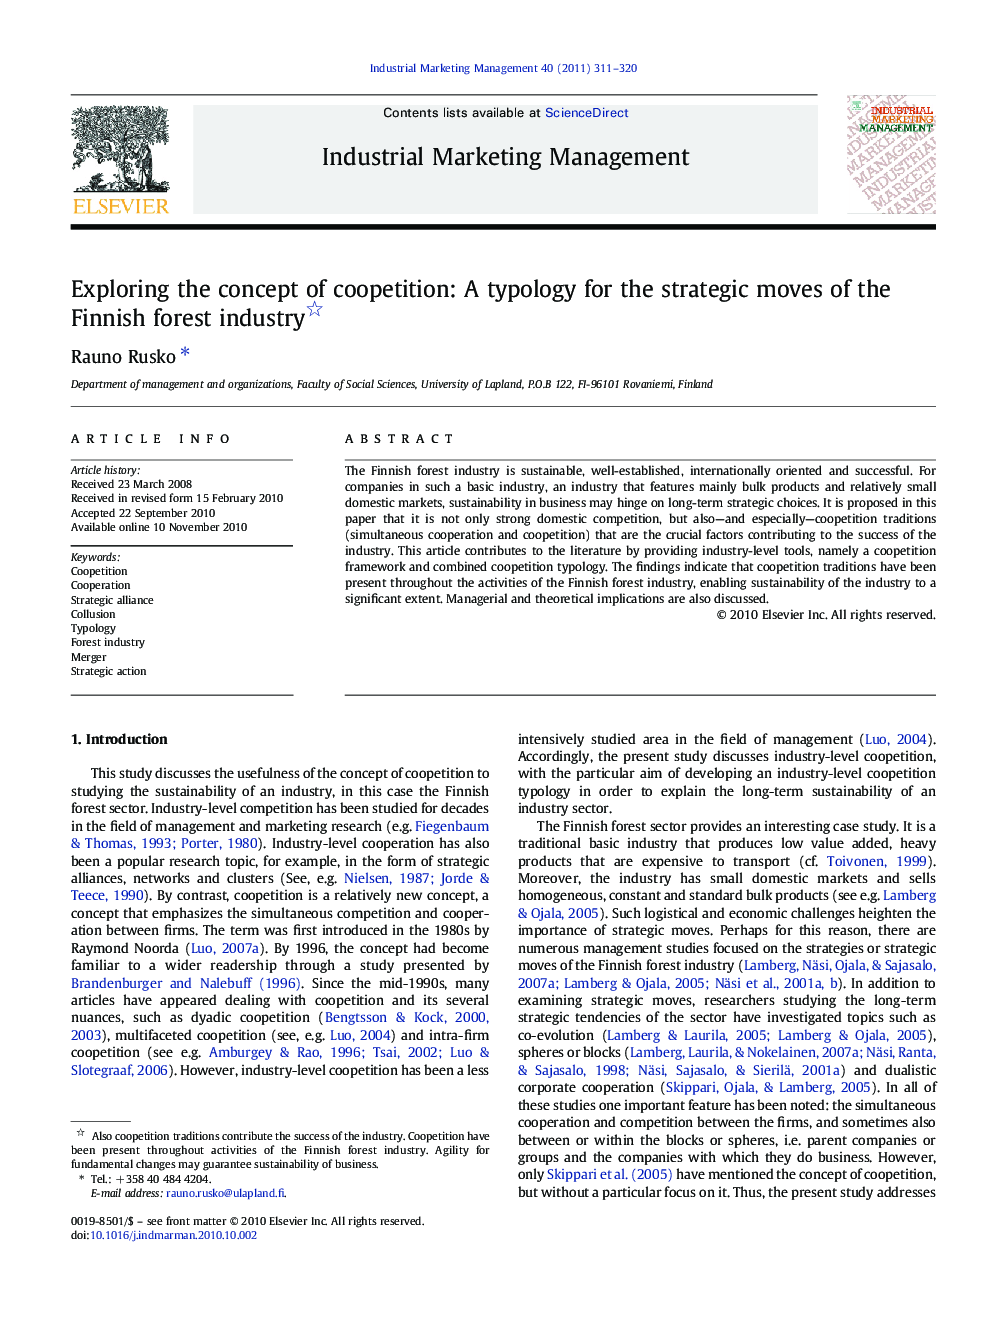 Exploring the concept of coopetition: A typology for the strategic moves of the Finnish forest industry 